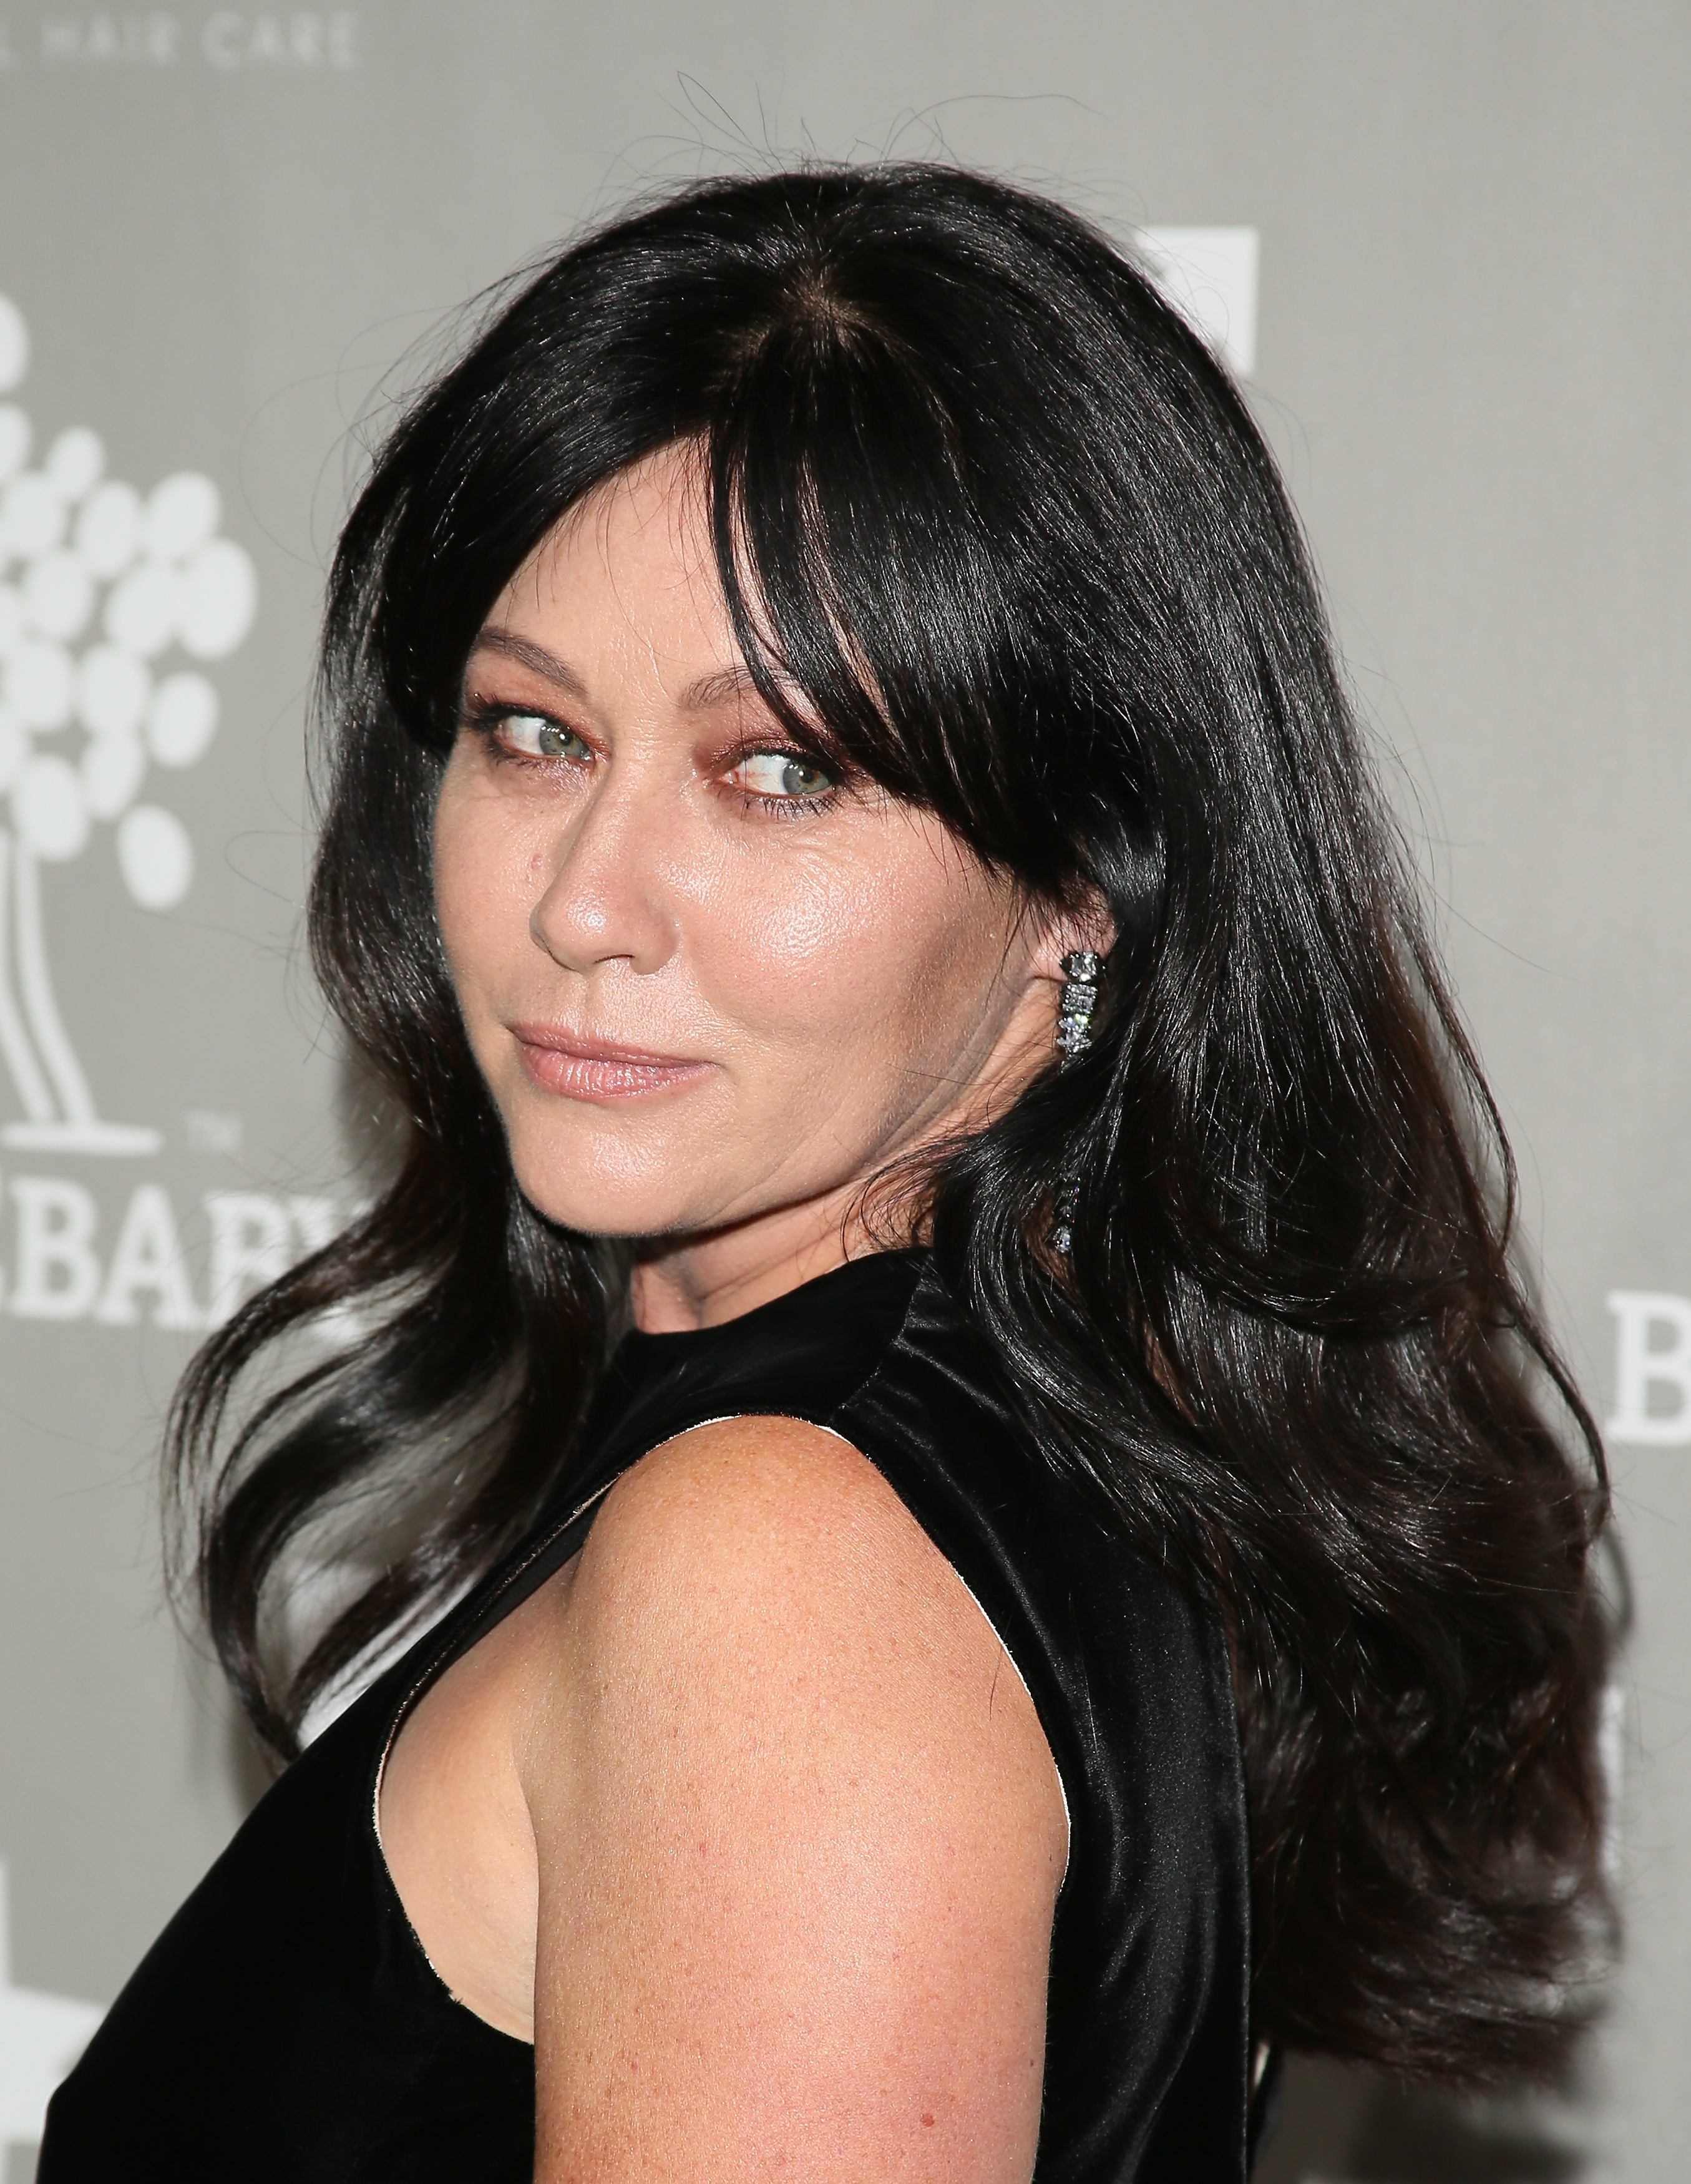 Shannen Doherty attends Baby2Baby Gala presented by MarulaOil & Kayne Capital Advisors Foundation honoring Kerry Washington at 3LABS in Culver City, California on November 14, 2015. | Source: Getty Images